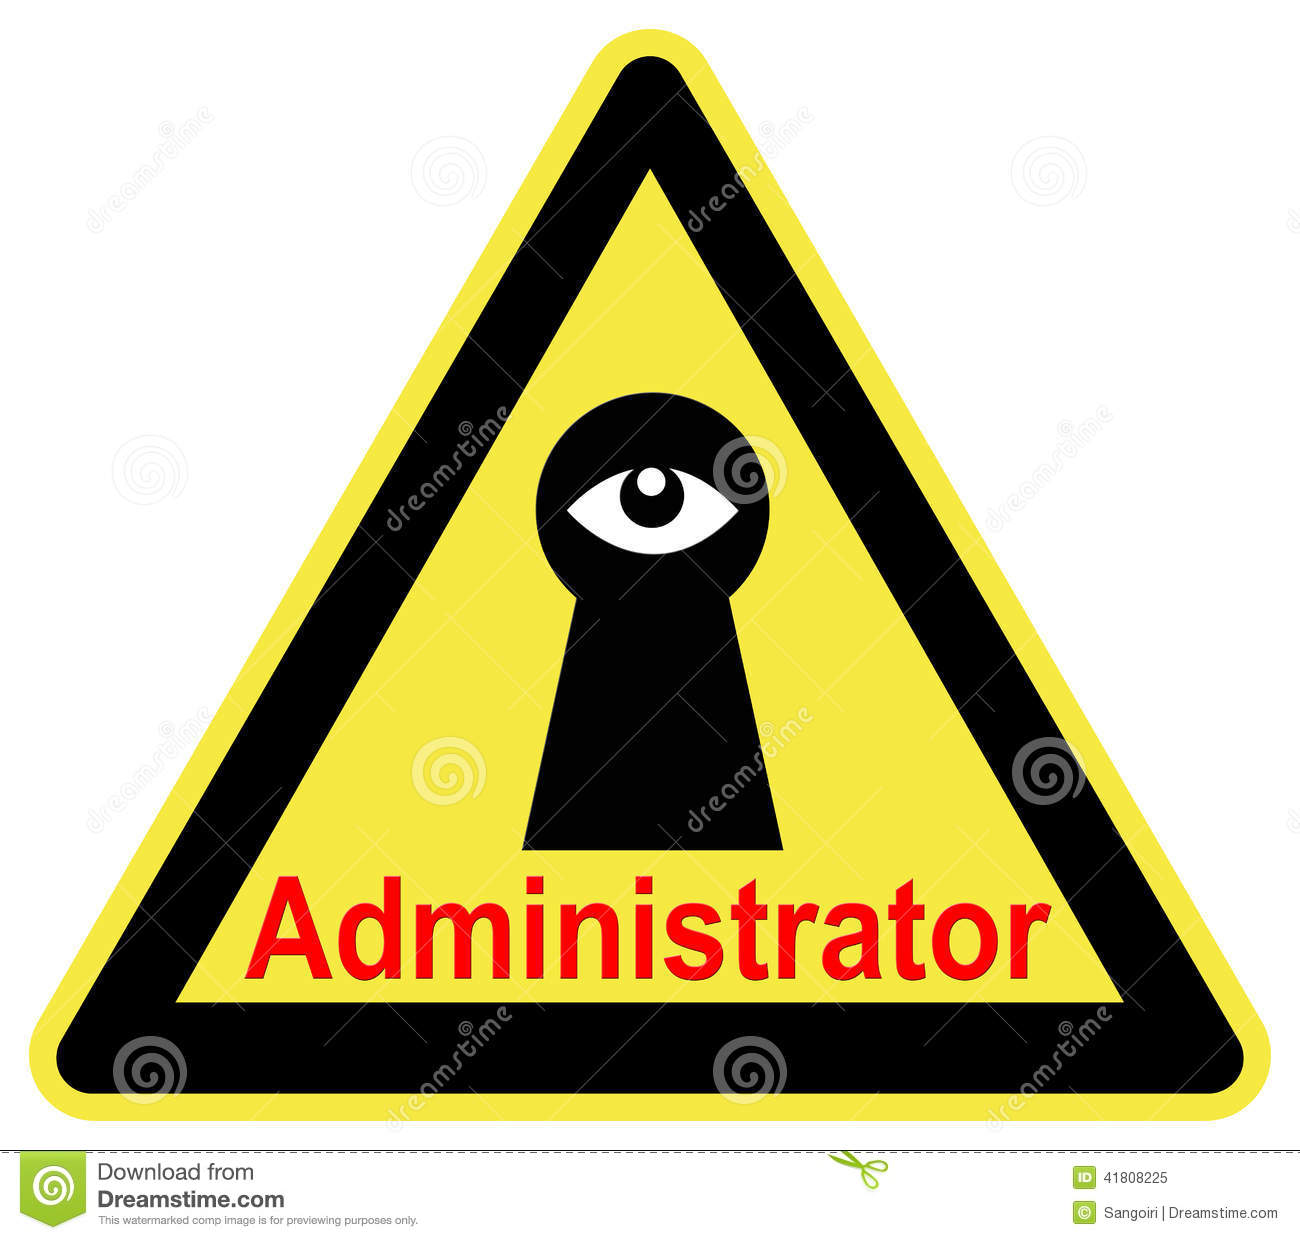 Be Aware That The System Administrator Can Trace Every Activity Of All    